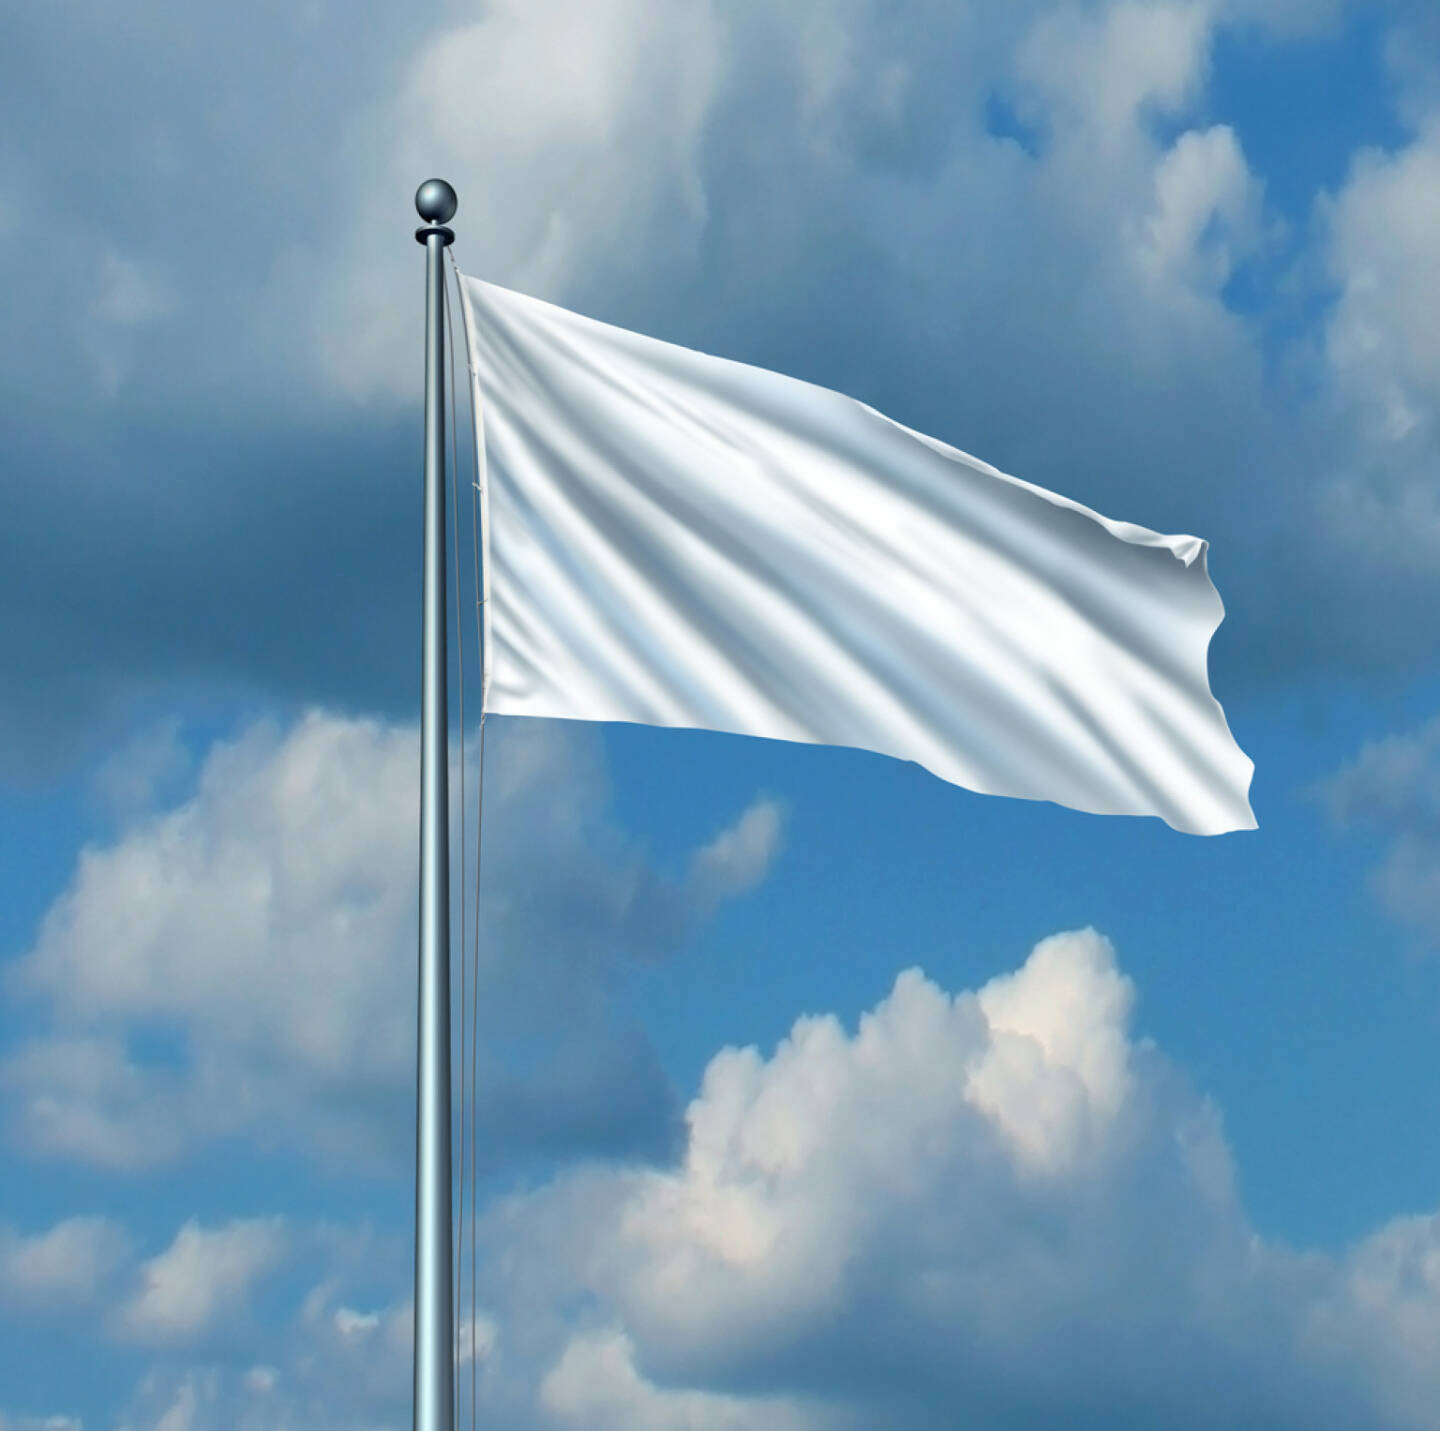 weiße Fahne, Fahne, aufgeben, hissen, nachgeben, http://www.shutterstock.com/de/pic-169932164/stock-photo-white-flag-surrender-symbol-as-a-metaphor-for-retreat-in-business-with-a-blank-cloth-on-a-flagpole.html (Bild: shutterstock.com)